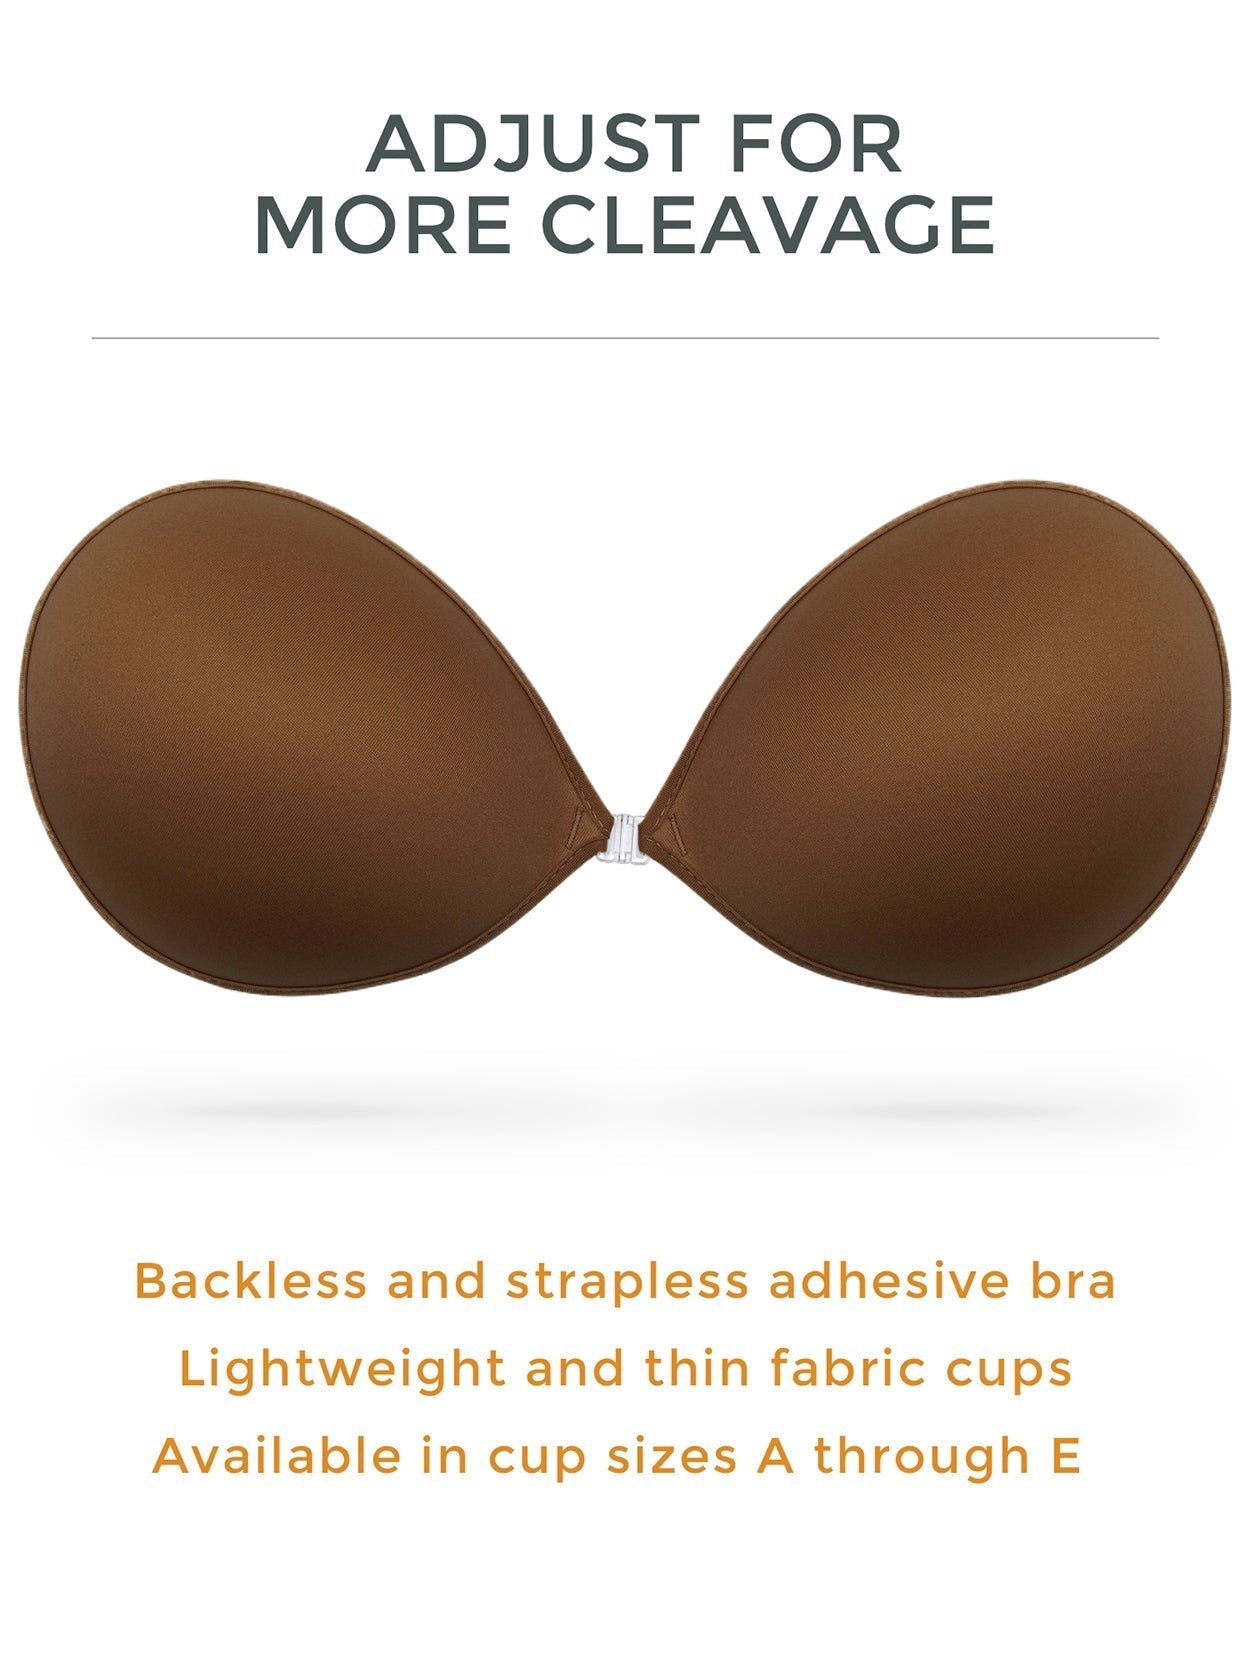 Adhesive Push-up Reusable Self Silicone Bra Invisible Sticky Bra